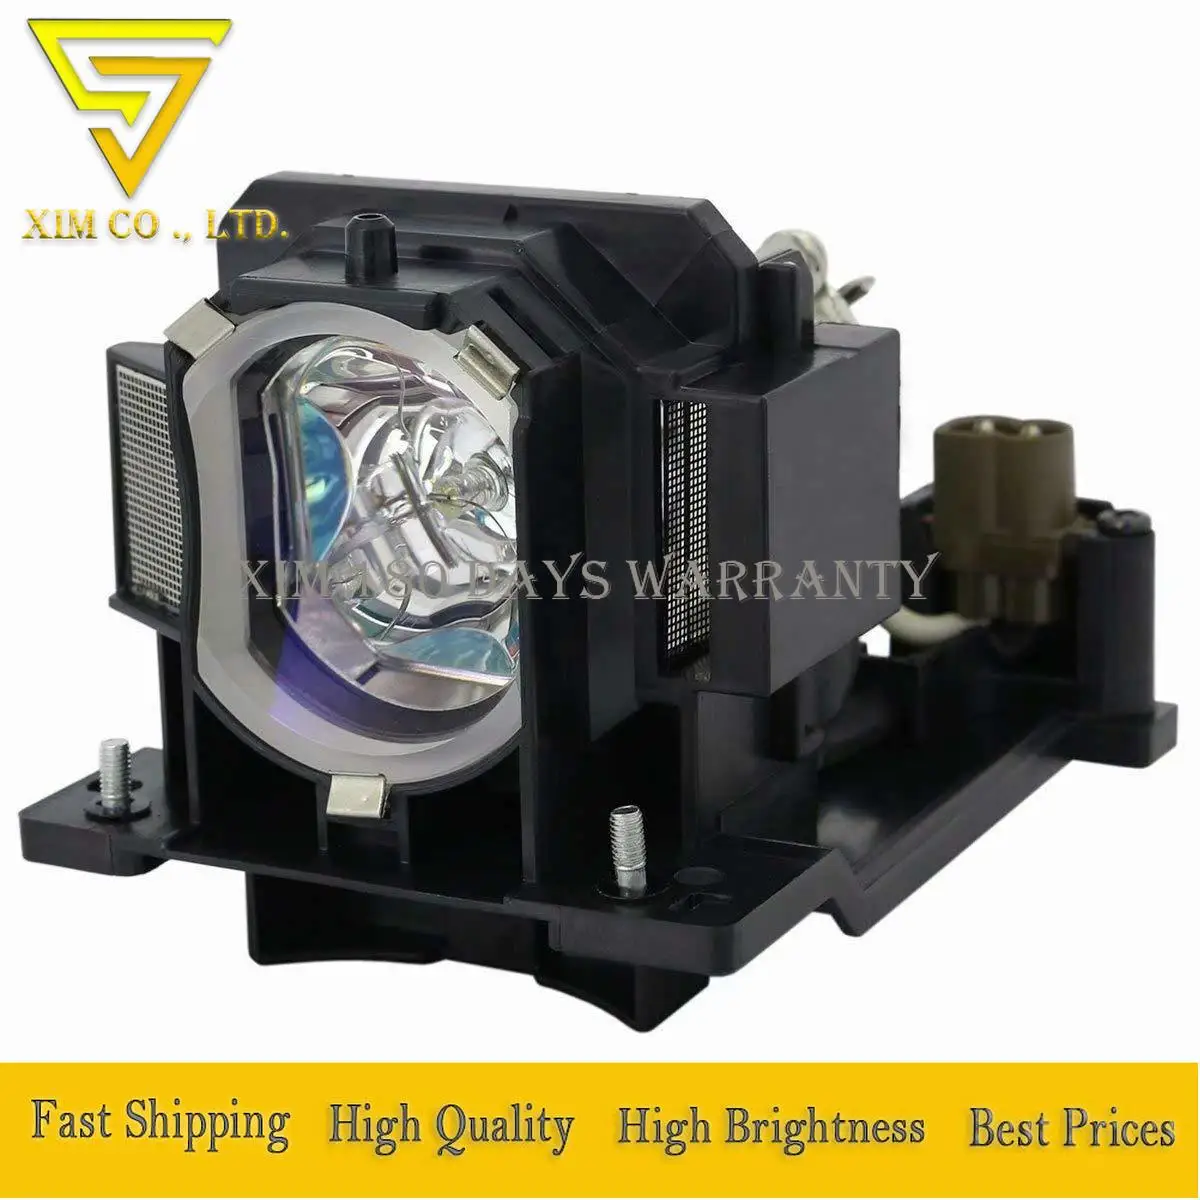 DT01091 Projector Lamp For Hitachi CP-AW100N CP-D10 CP-DW10 ED-AW100N ED-AW110N HCP-Q3 HCP-Q3W CP-DW1 high quality With Housing dt00771 replacement projector for hitachi cp x505 cp x505w cp x600 cp x605 cp x608 hcp 6600x hcp 6700x hcp 6800x hcp 7000x